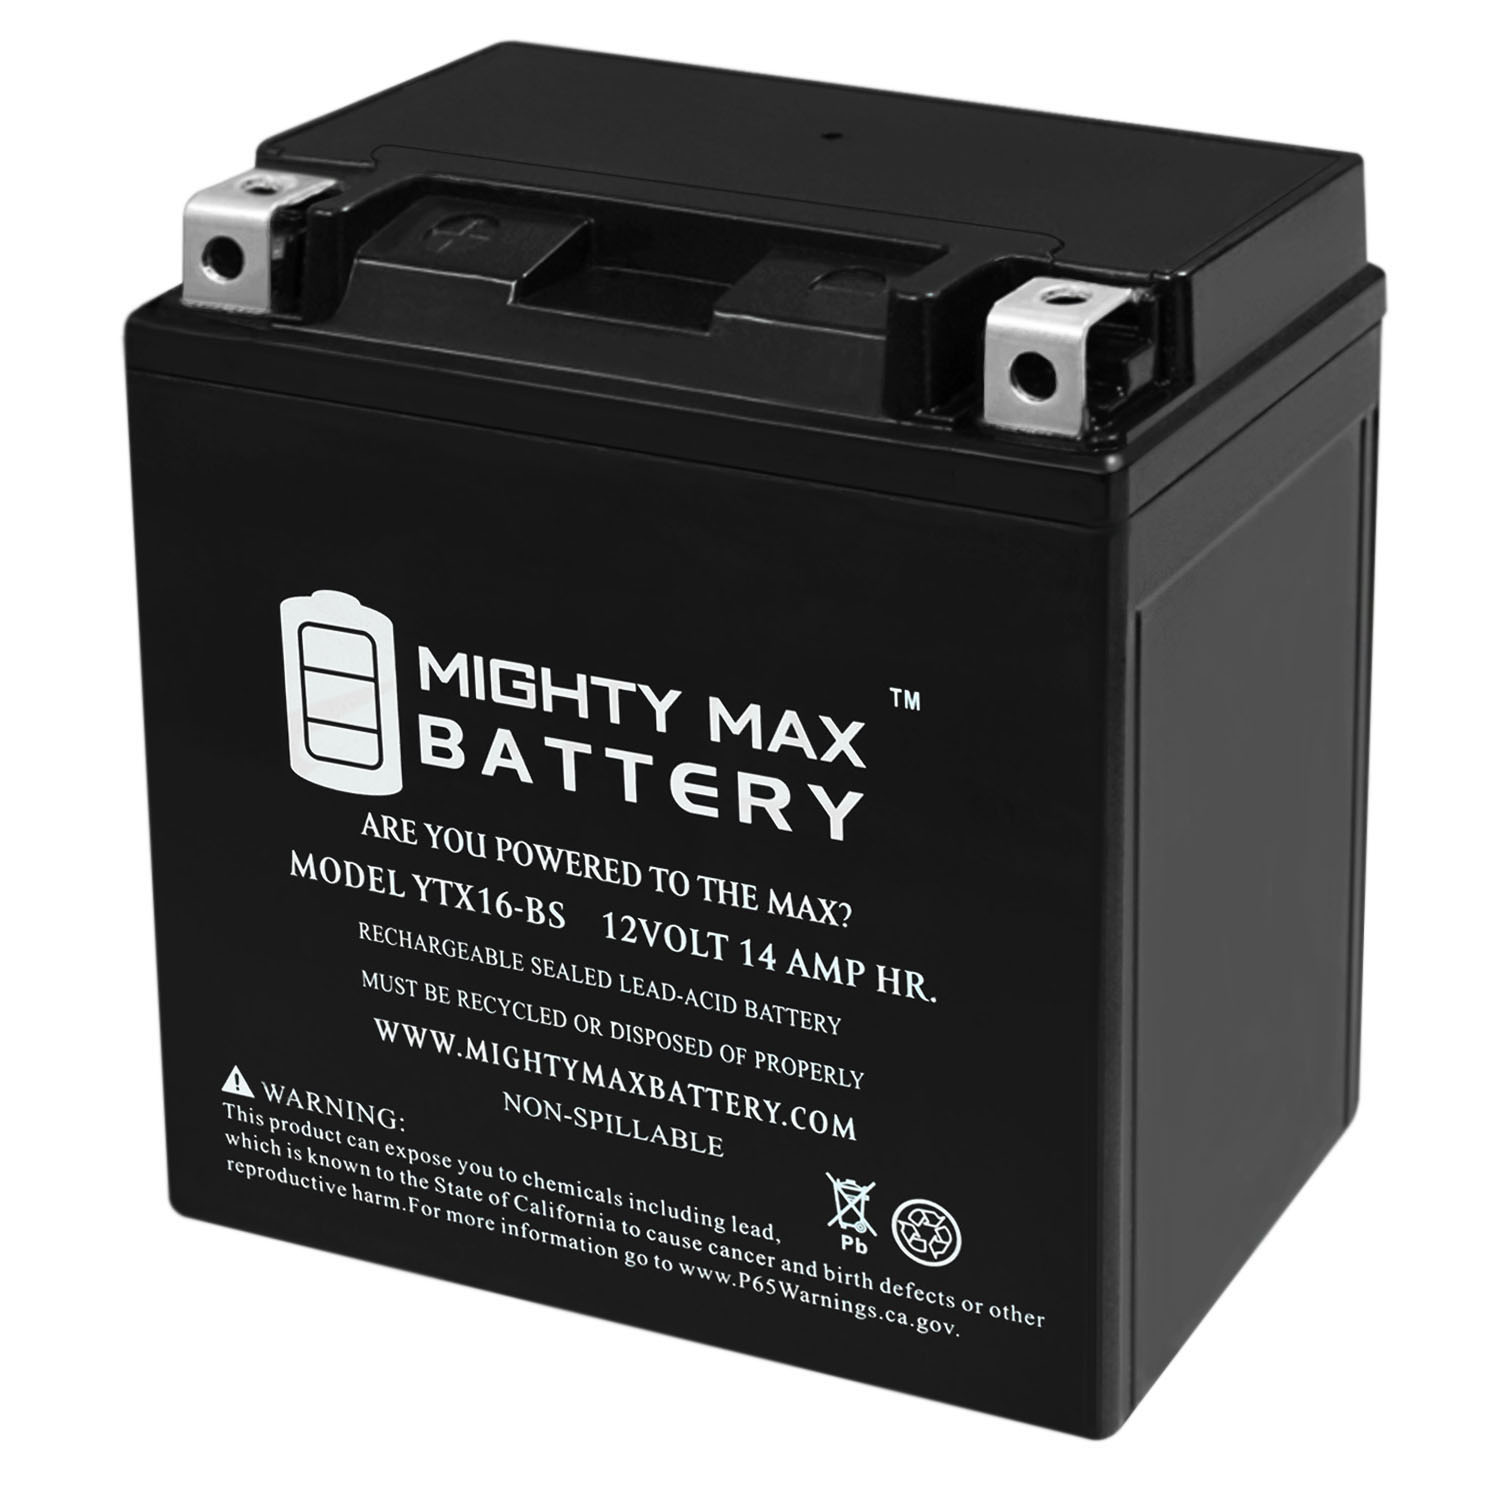 Bs battery. Yamaha Grizzly 125 аккумулятор. Power Sport Battery 16-4 12v14ah 230cca. Ytx14-BS. Аккумулятор Grizzly 63.